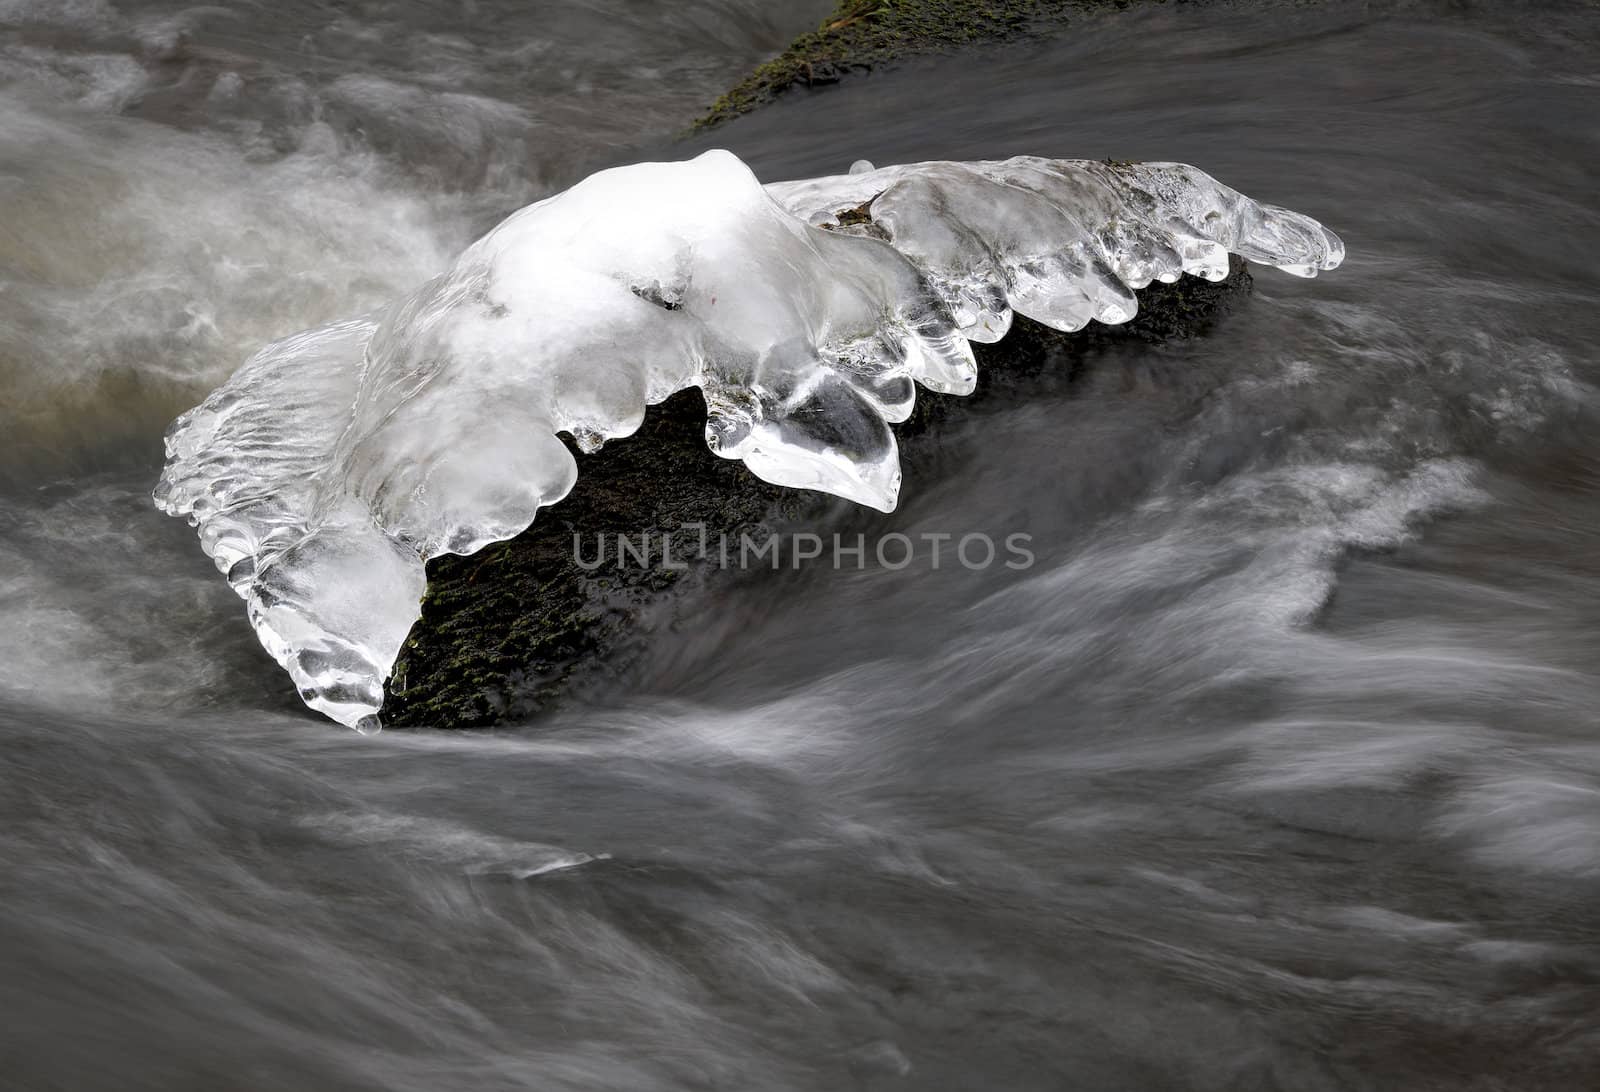 Winter river. Ice at water stream